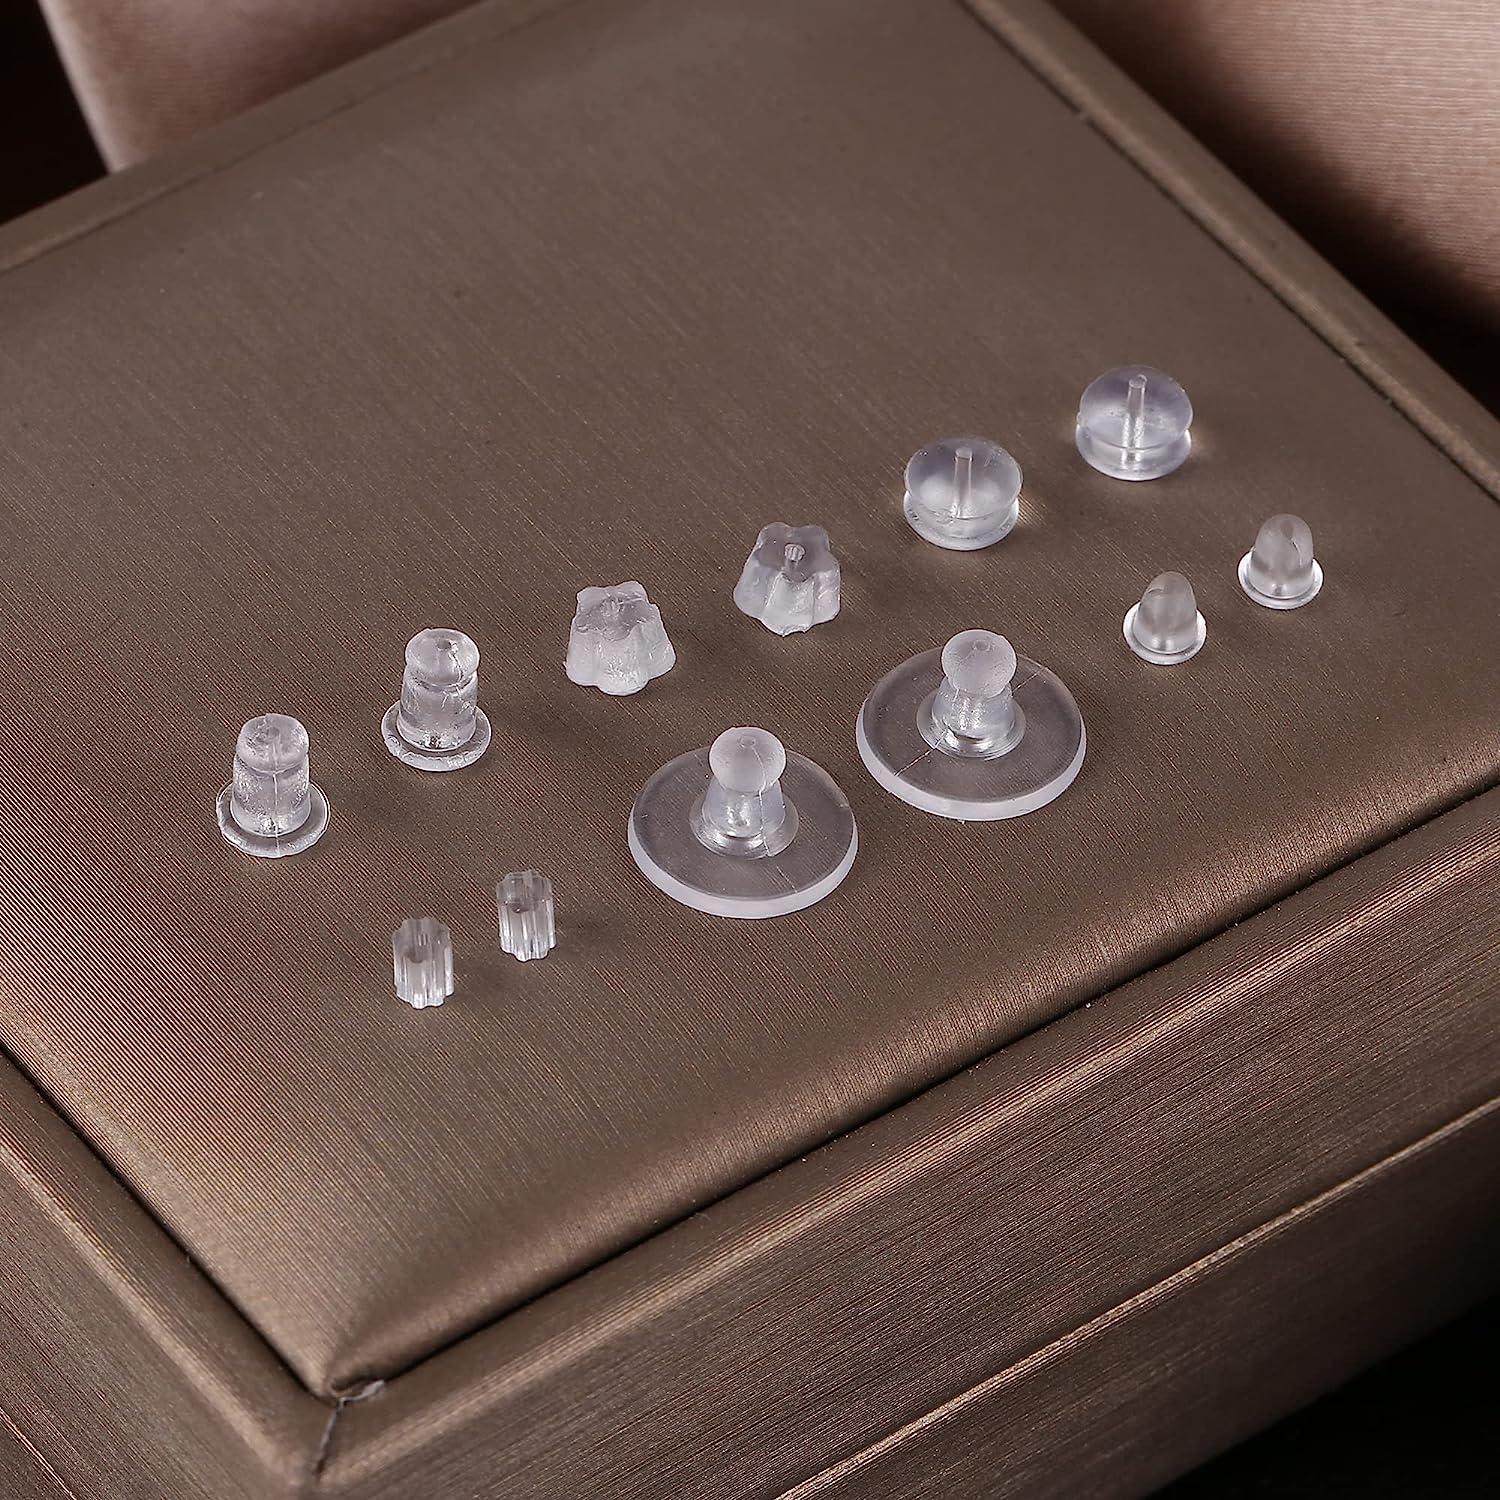 Clear Silicone Earring Backs - 150 Pcs / 75 Pairs Hypoallergenic Secure  Push-Back Earring Stoppers for Stud Earrings, 10x6mm Full-Cover Studs